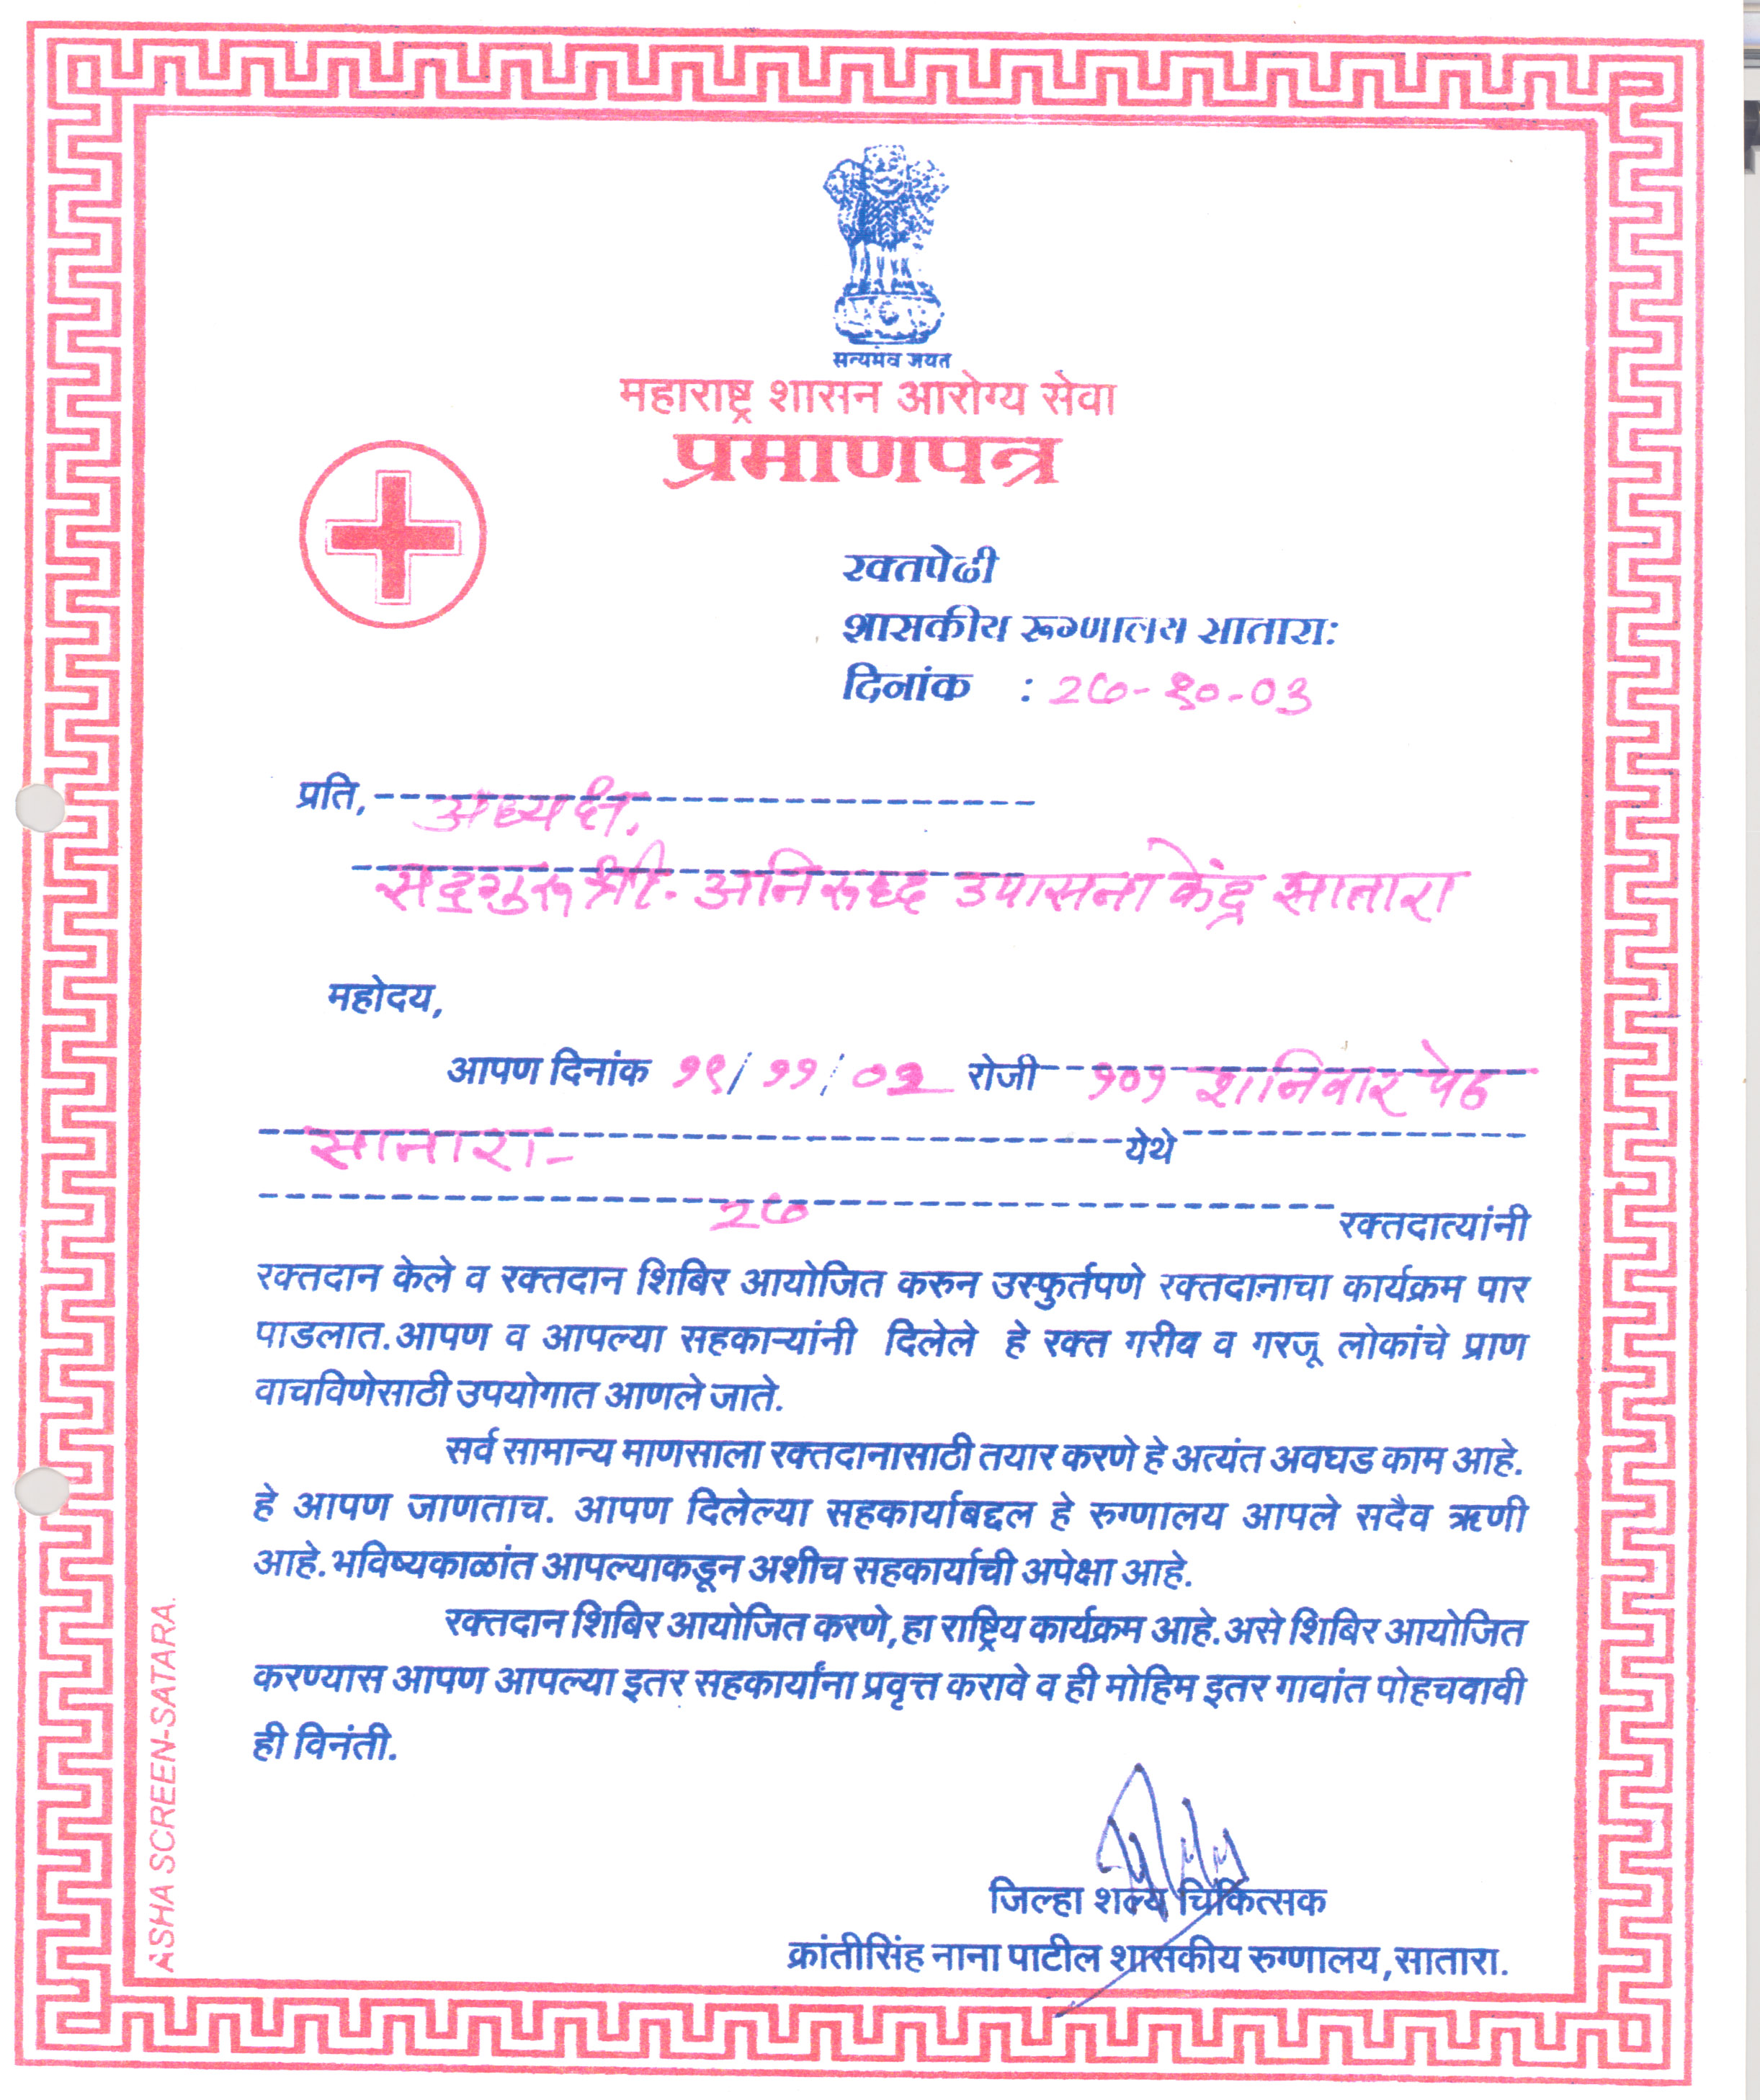 Appreciation-Letter from Maharashtra Shasan Blood Bank 2003-for-Aniruddhafoundation-Compassion-Social-services